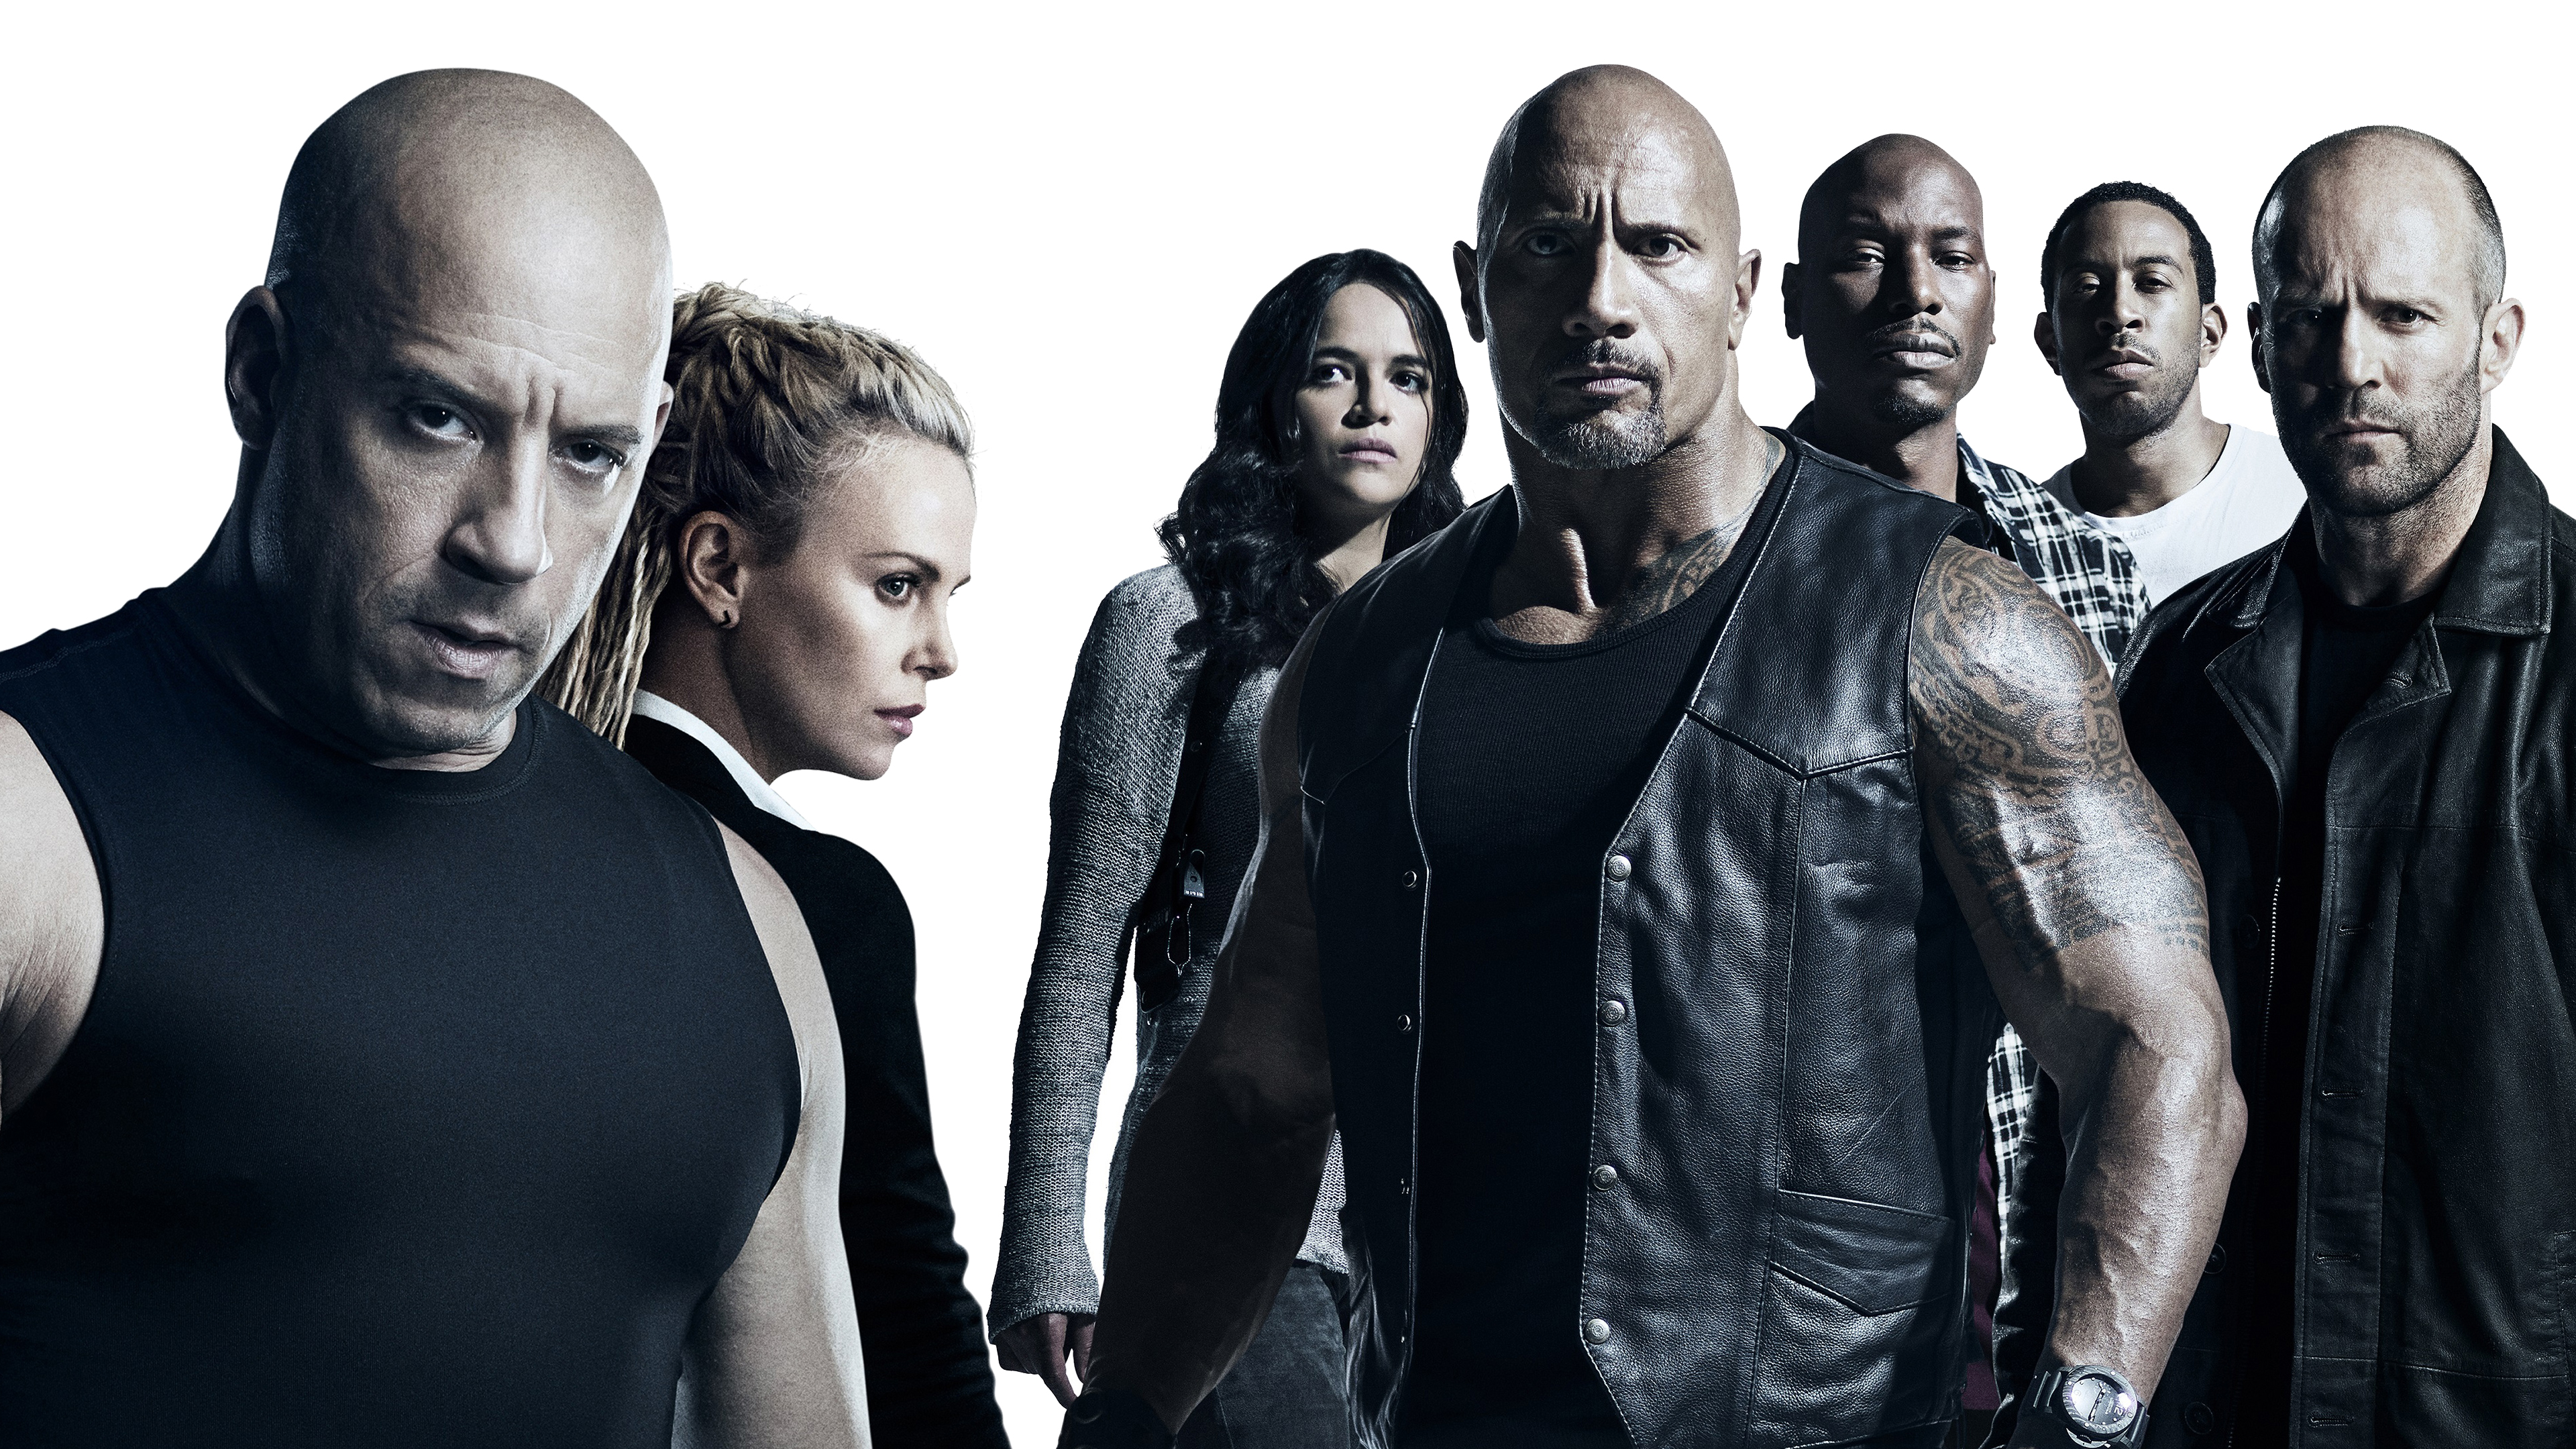 Movie The Fate of The Furious 4k Ultra HD Wallpaper